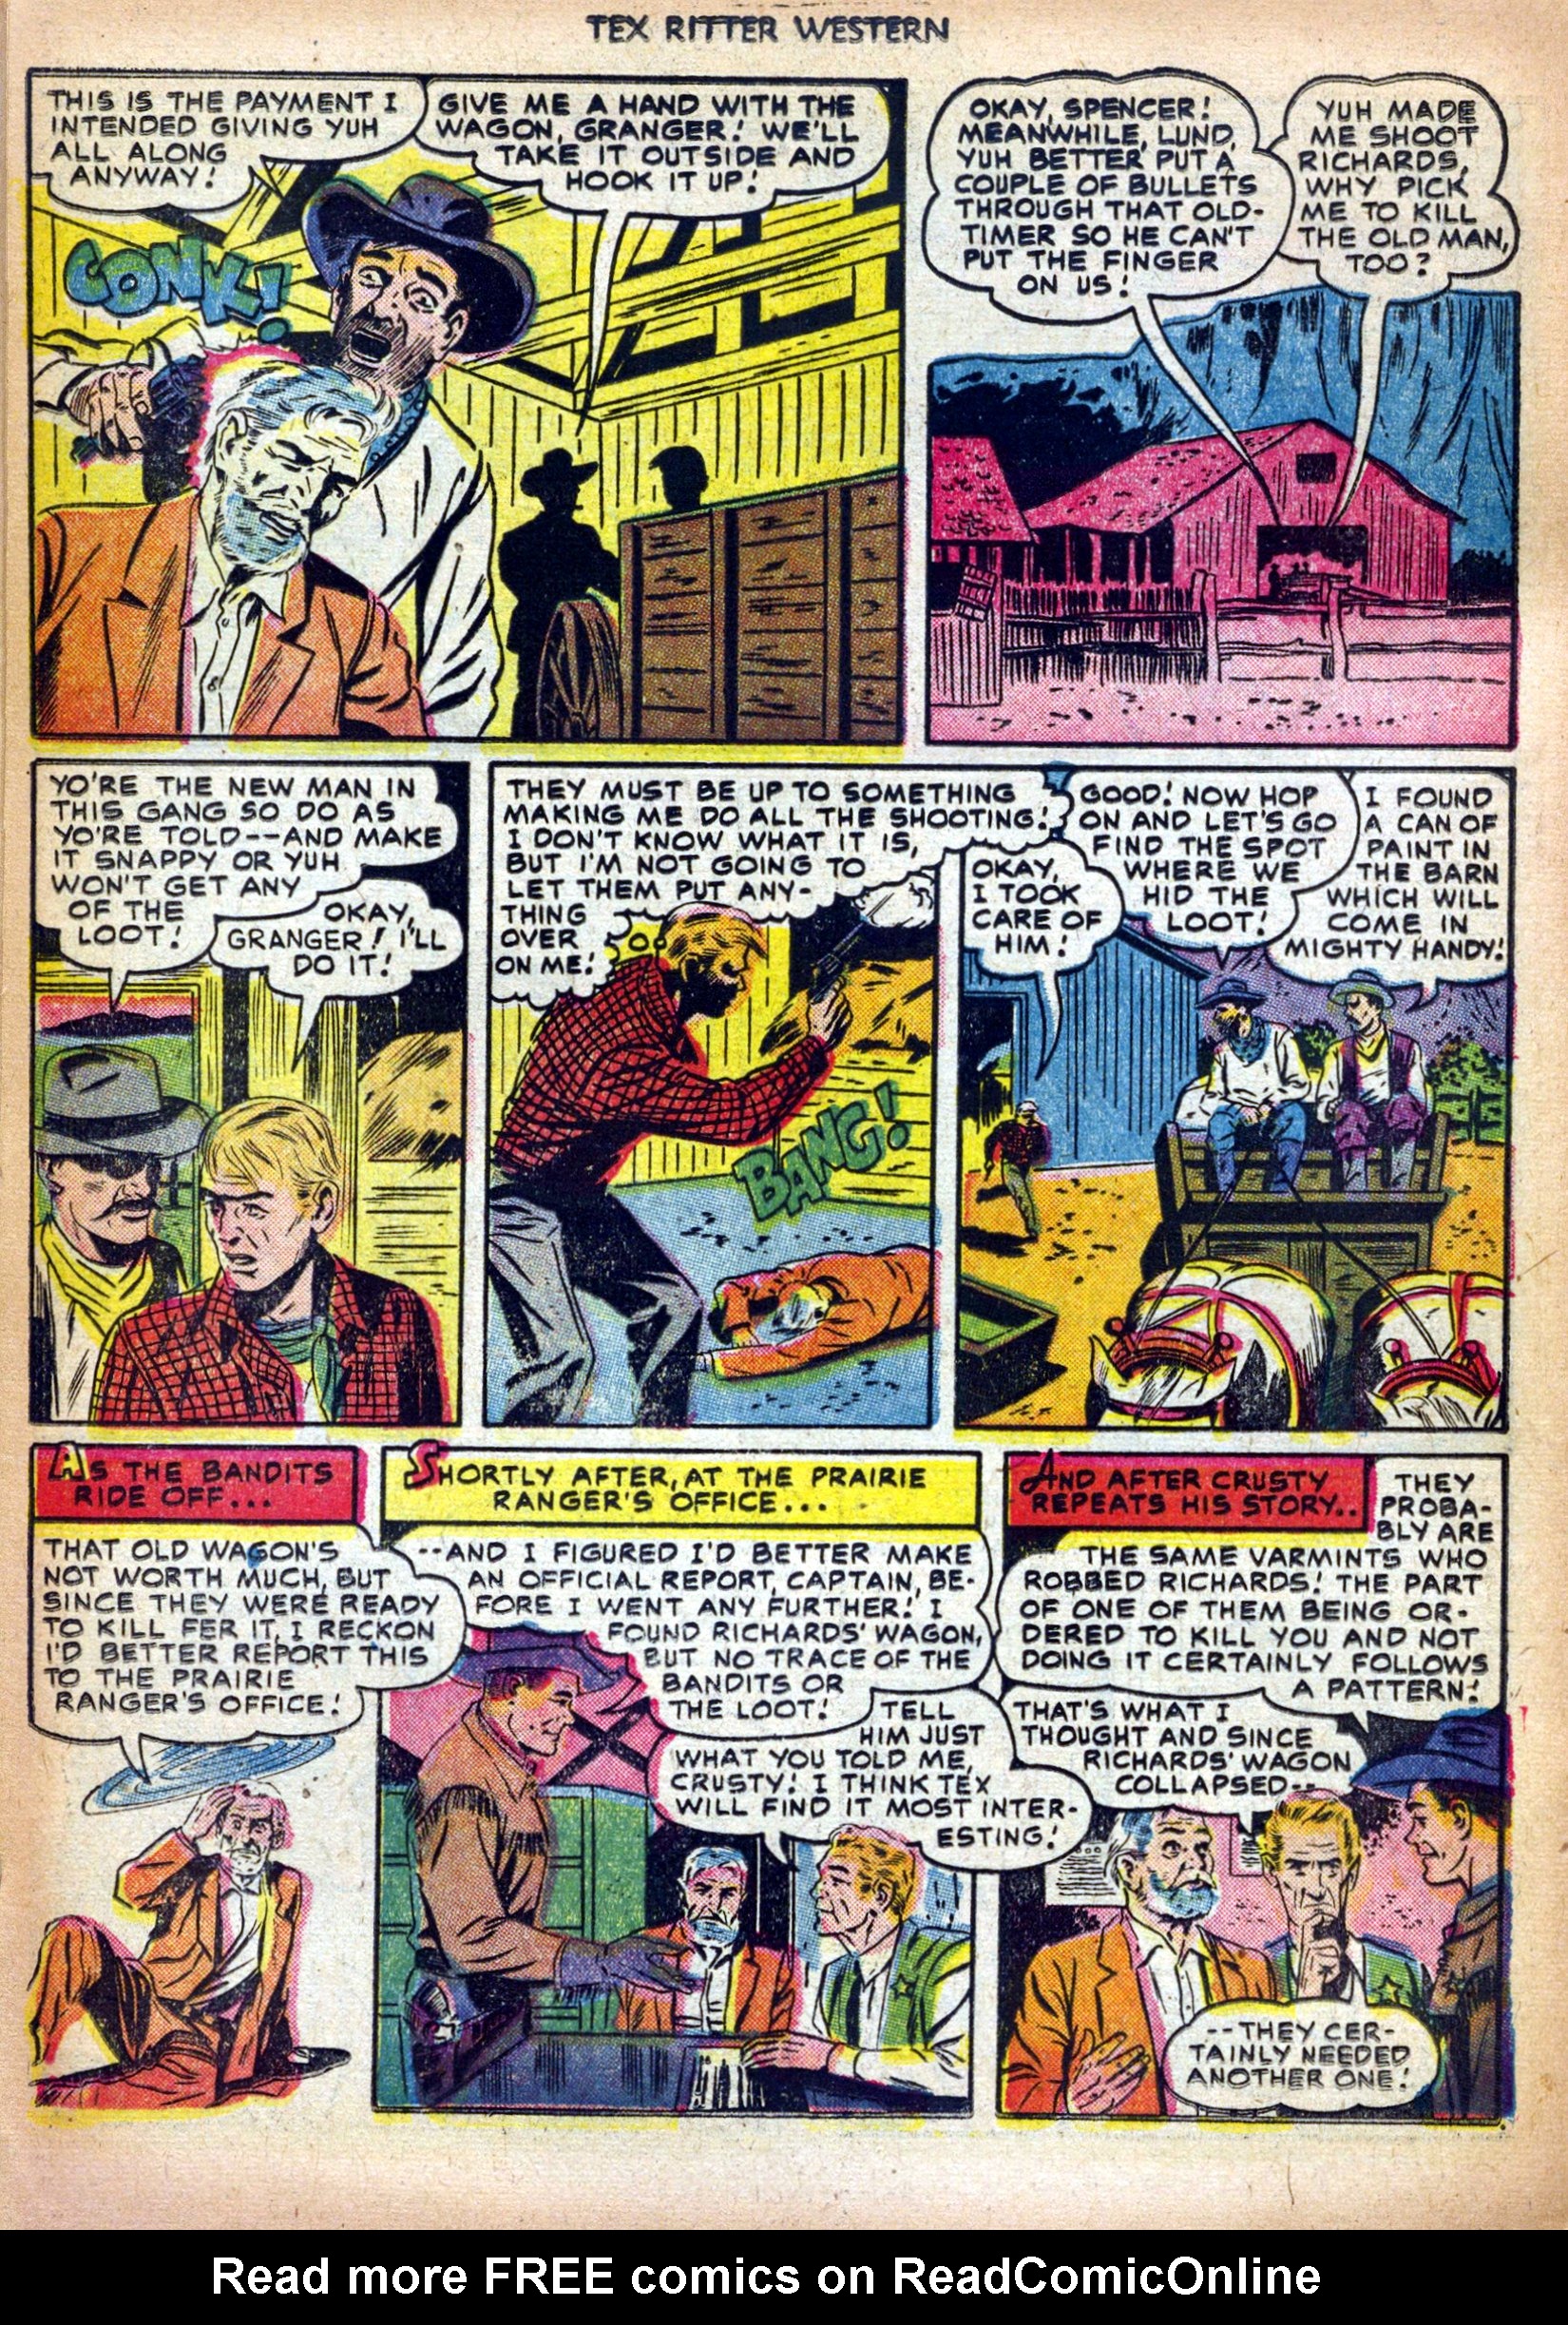 Read online Tex Ritter Western comic -  Issue #13 - 30